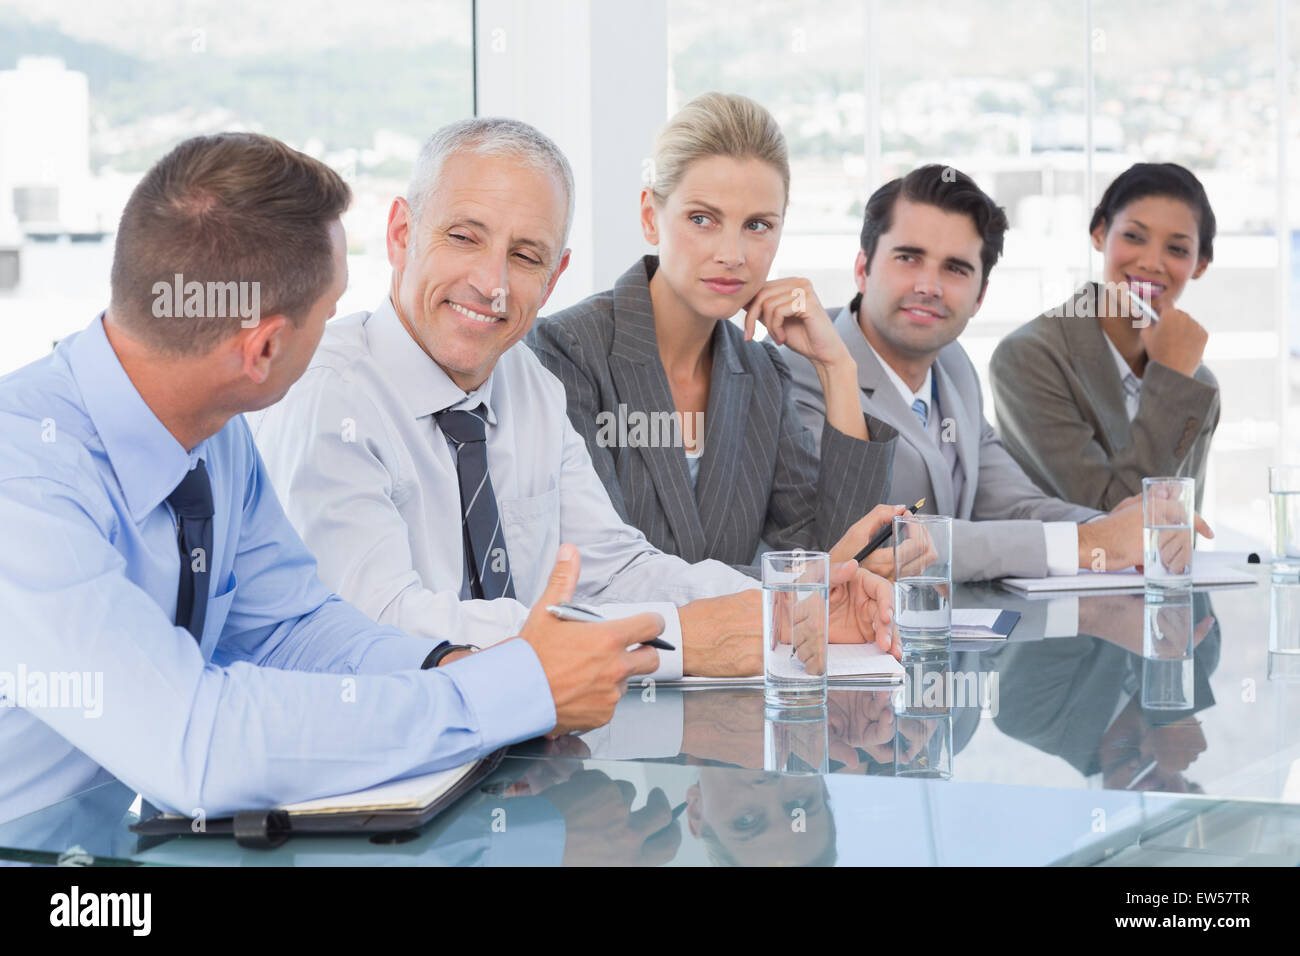 Business team having conversation at conference Stock Photo